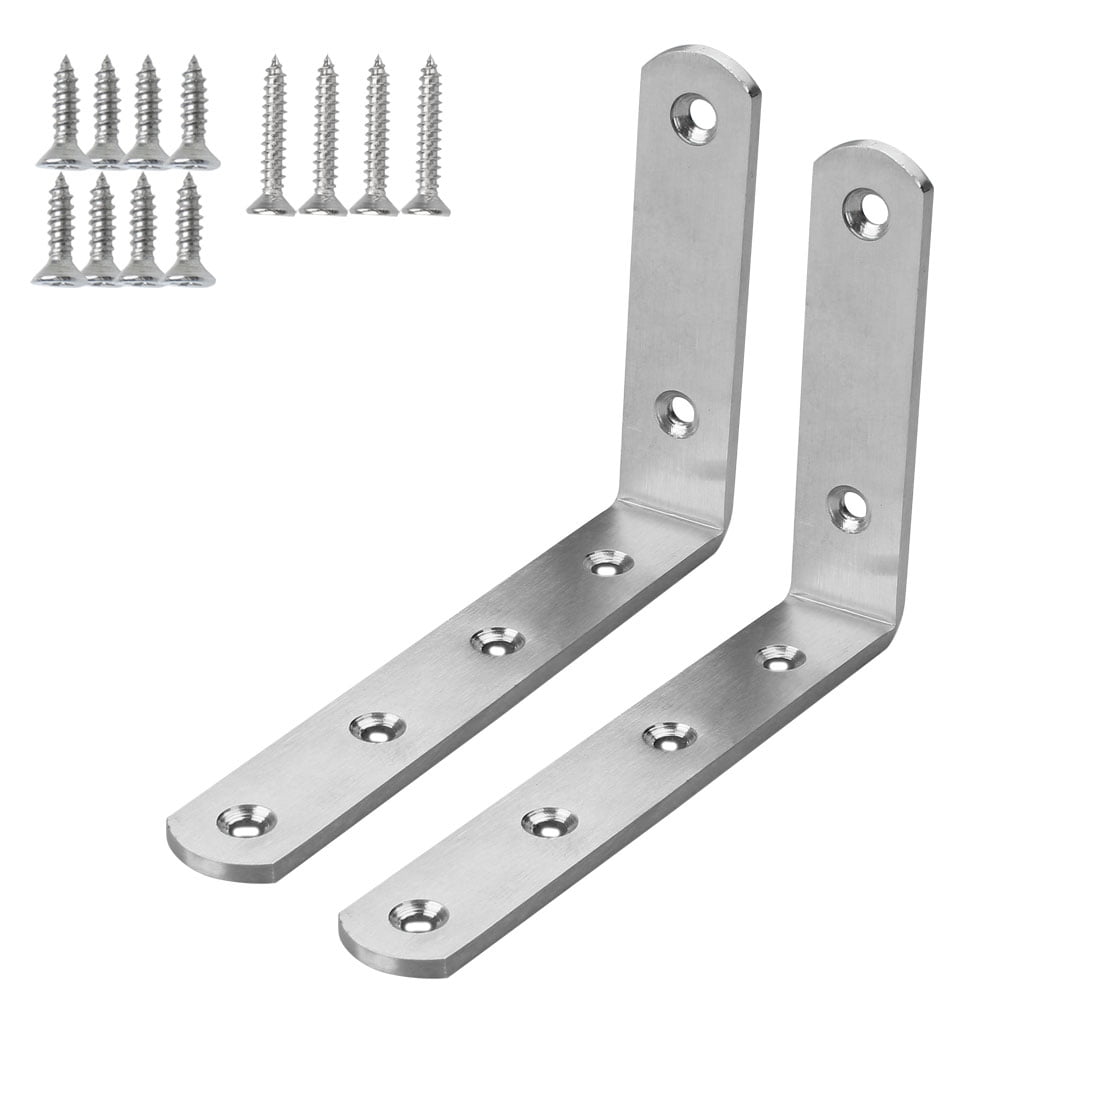 Uxcell 2 Piece 150 x 100mm Stainless Steel L Shaped Angle Brackets with ...